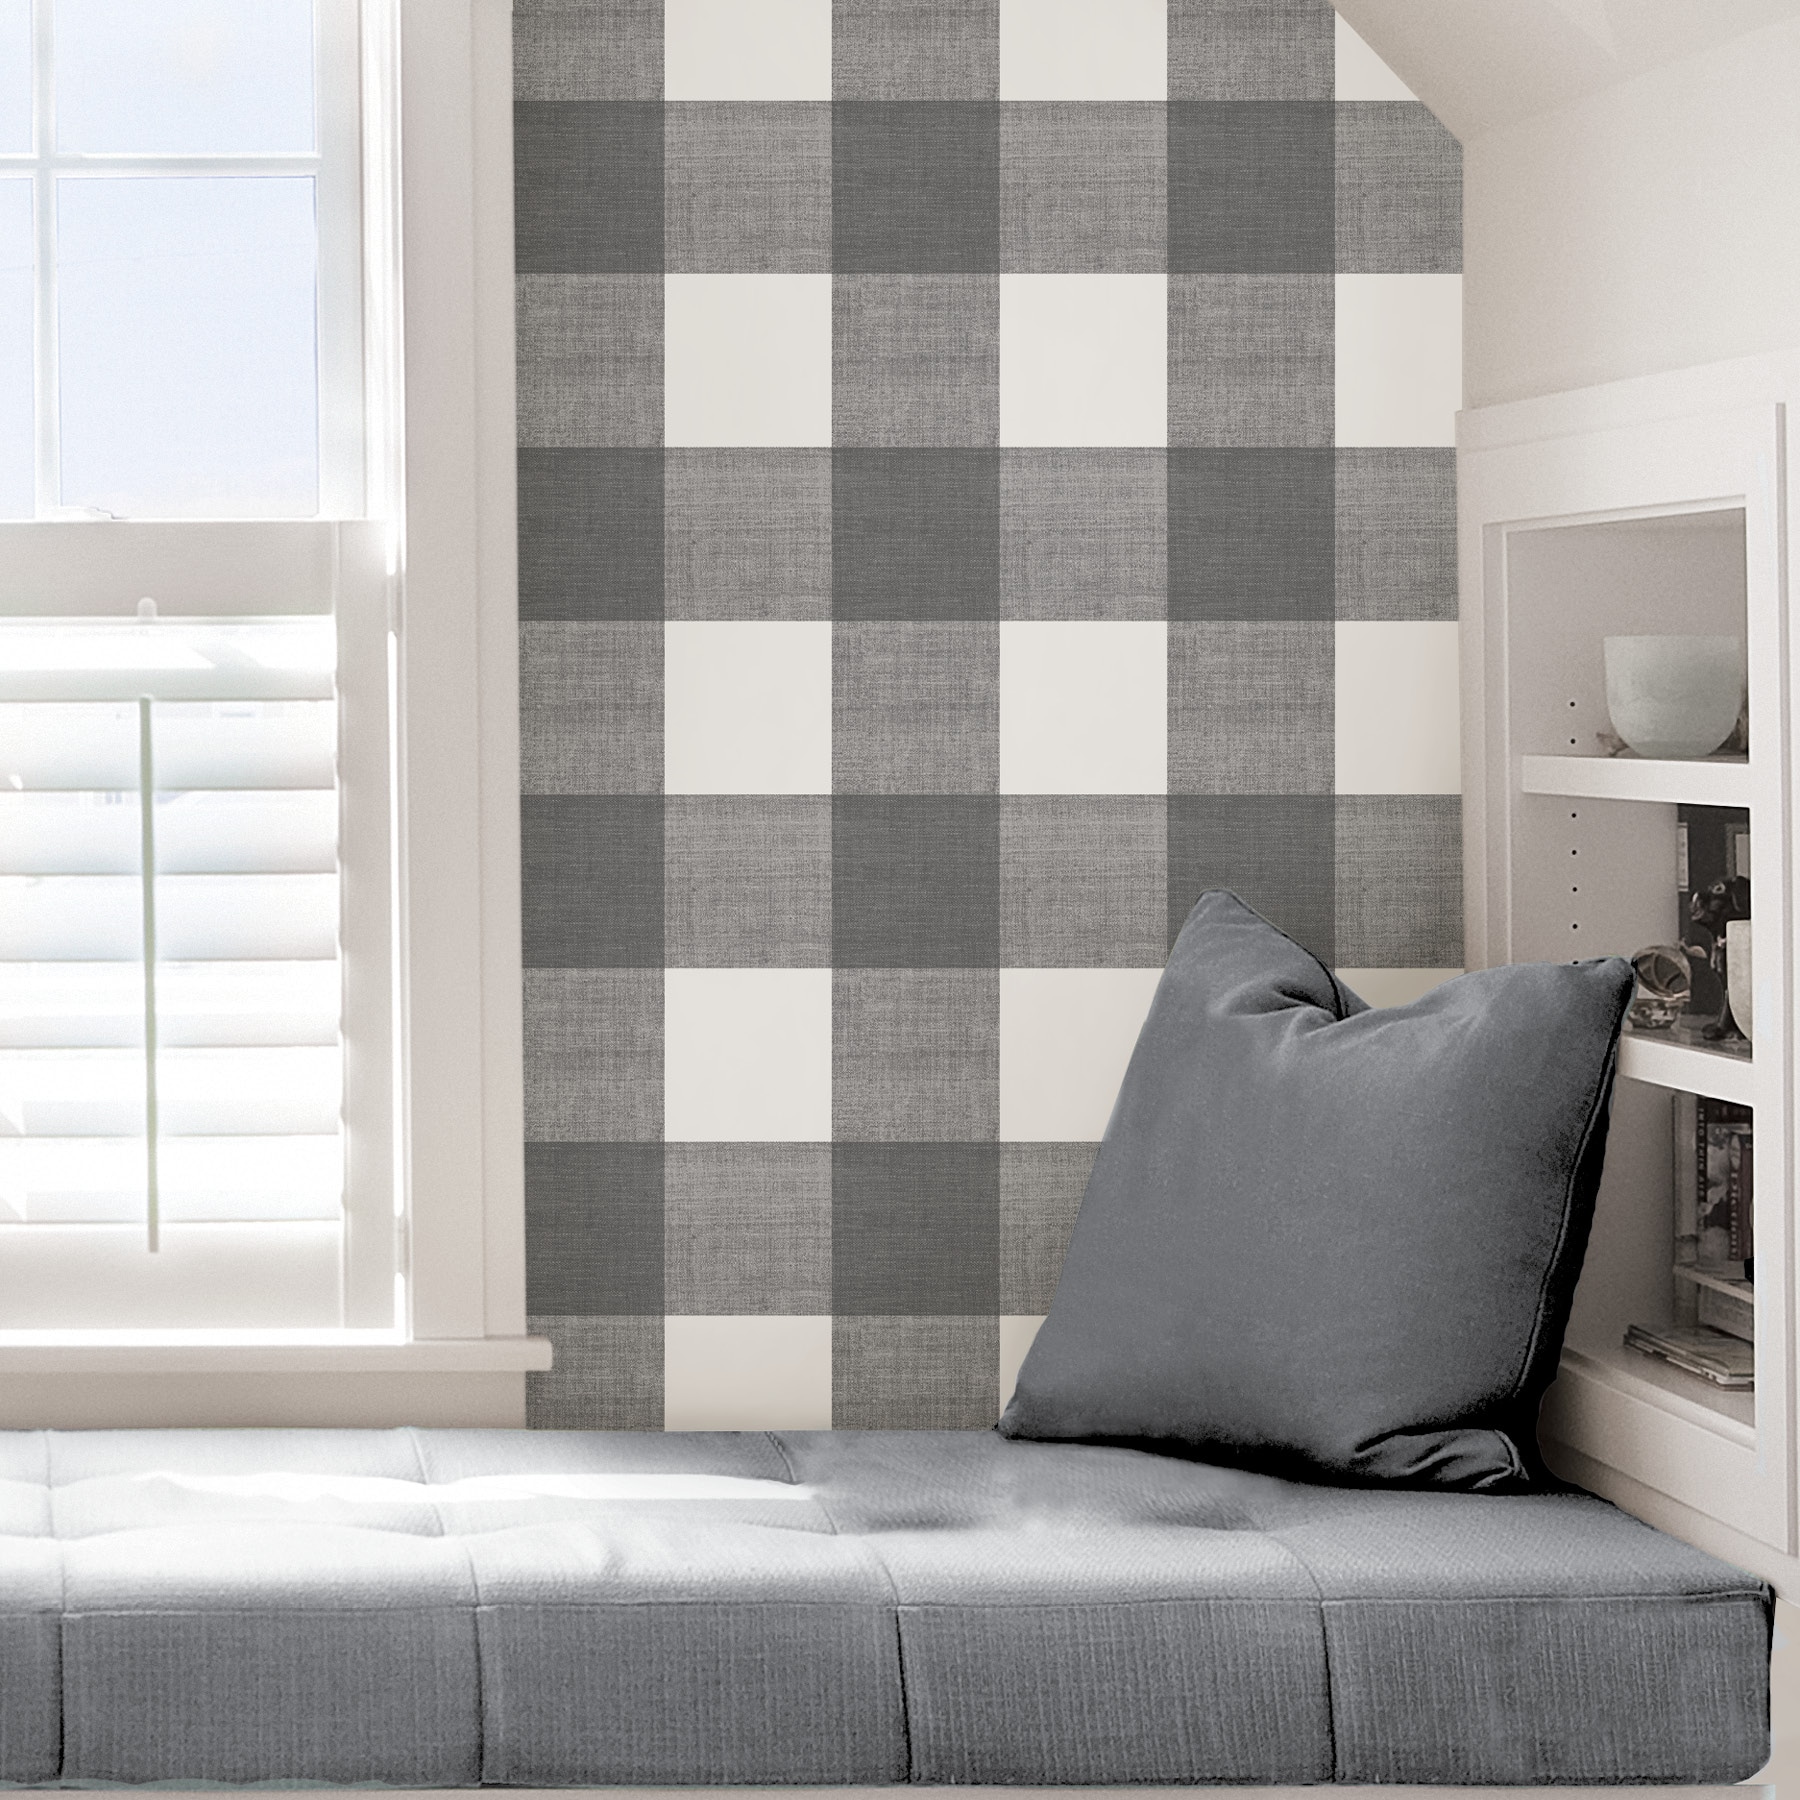 Melwod Pink Brown White Plaid Peel and Stick Wallpaper 1771 x 394 Buffalo  Plaid Contact Paper Self Adhesive Gingham Plaid Wall Paper for Drawer Liner  Shelf Cabinets Furniture Walls Girls Room 